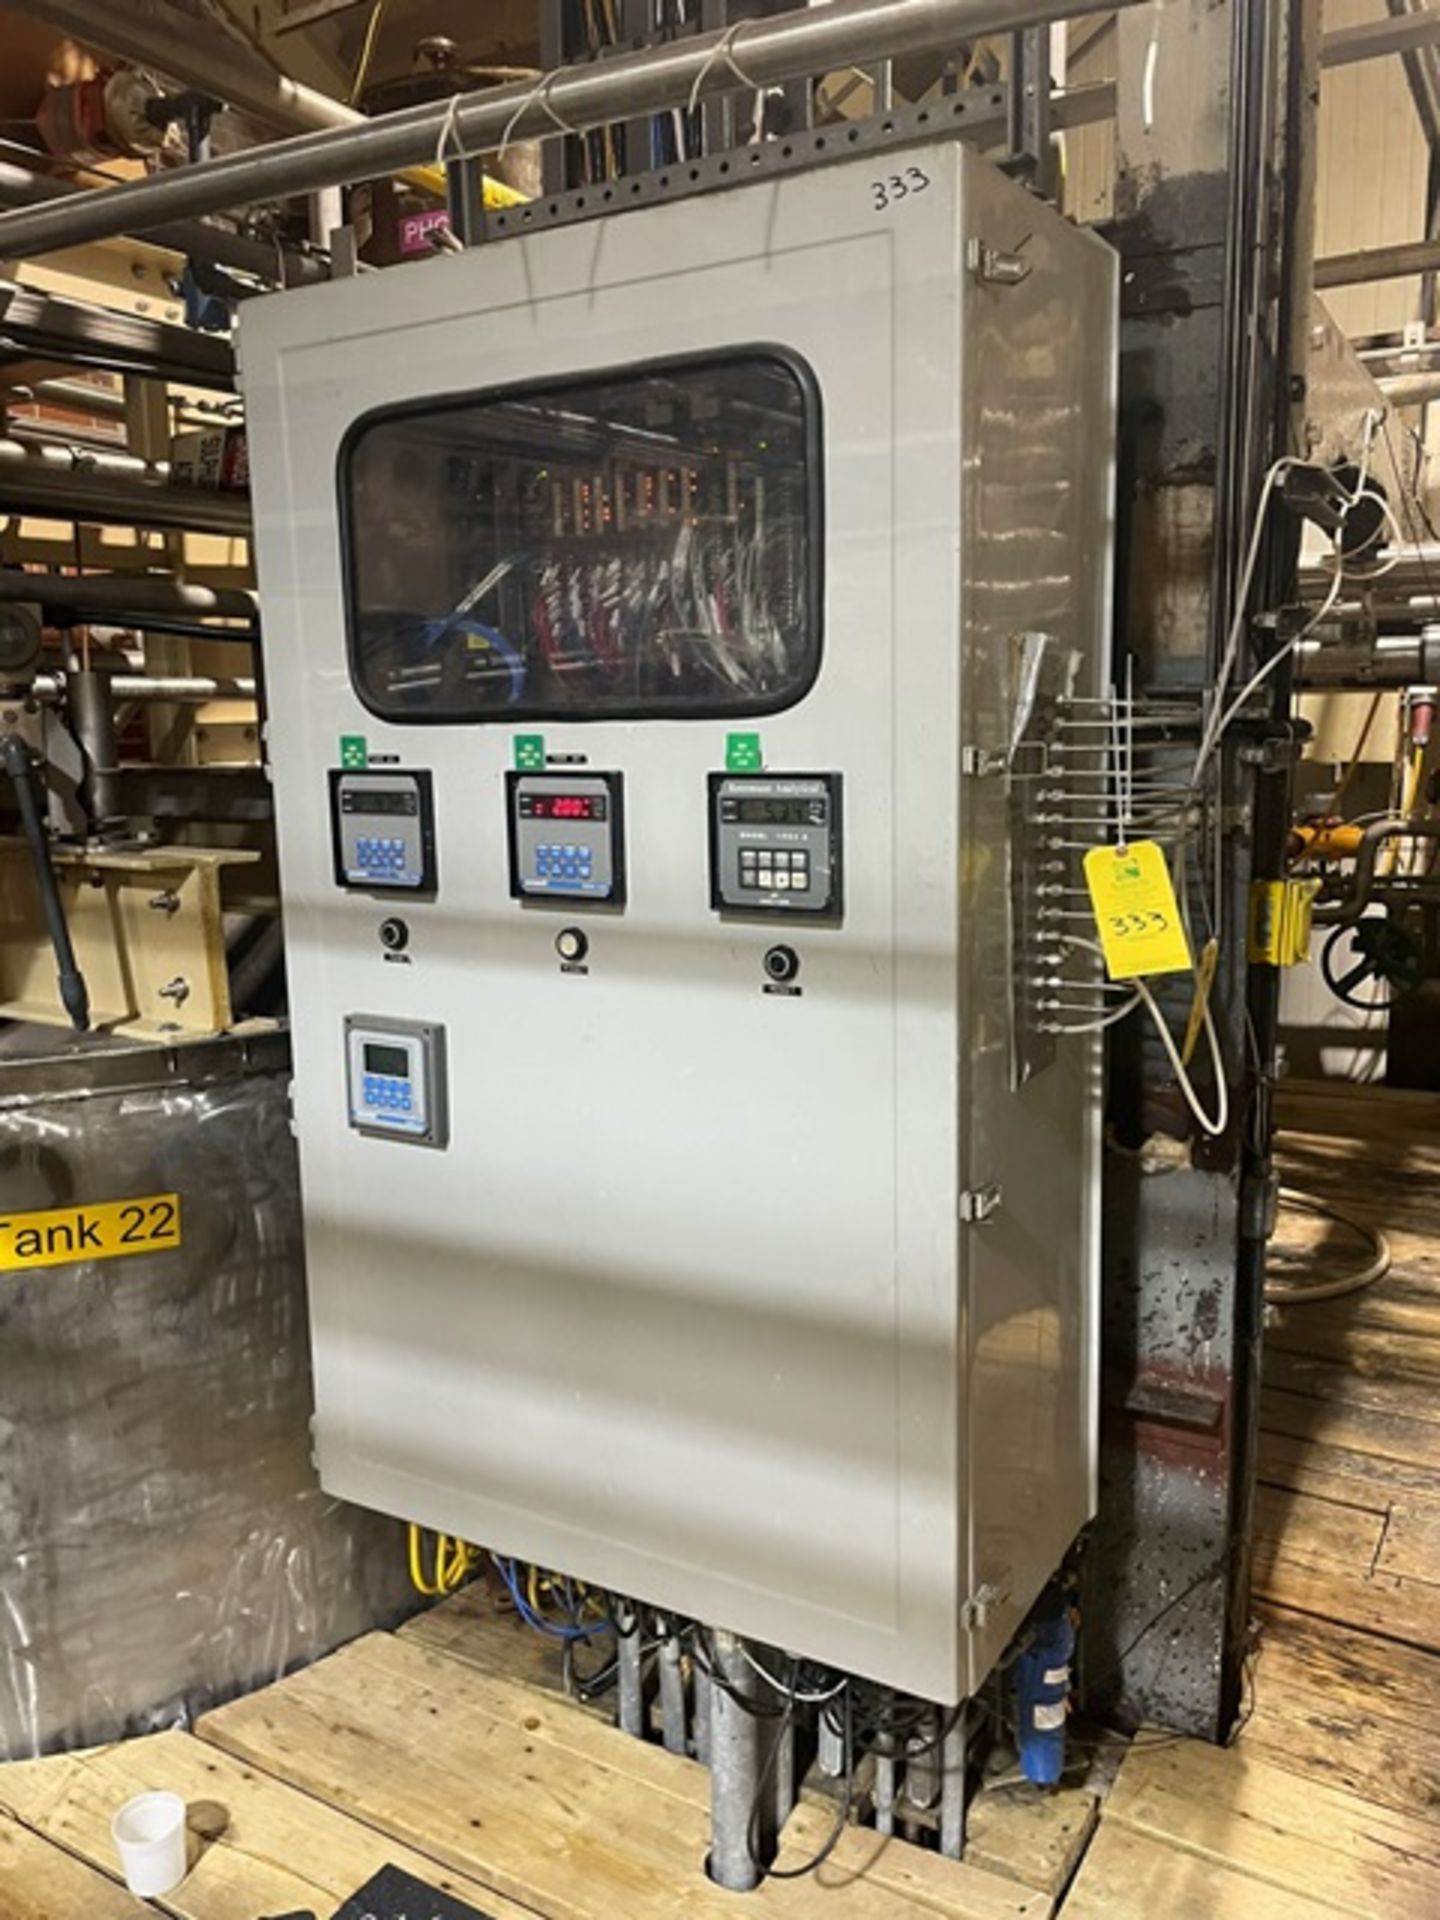 Rosemont Analytical Electric Control Panel, Rigging & Loading Fee: $600